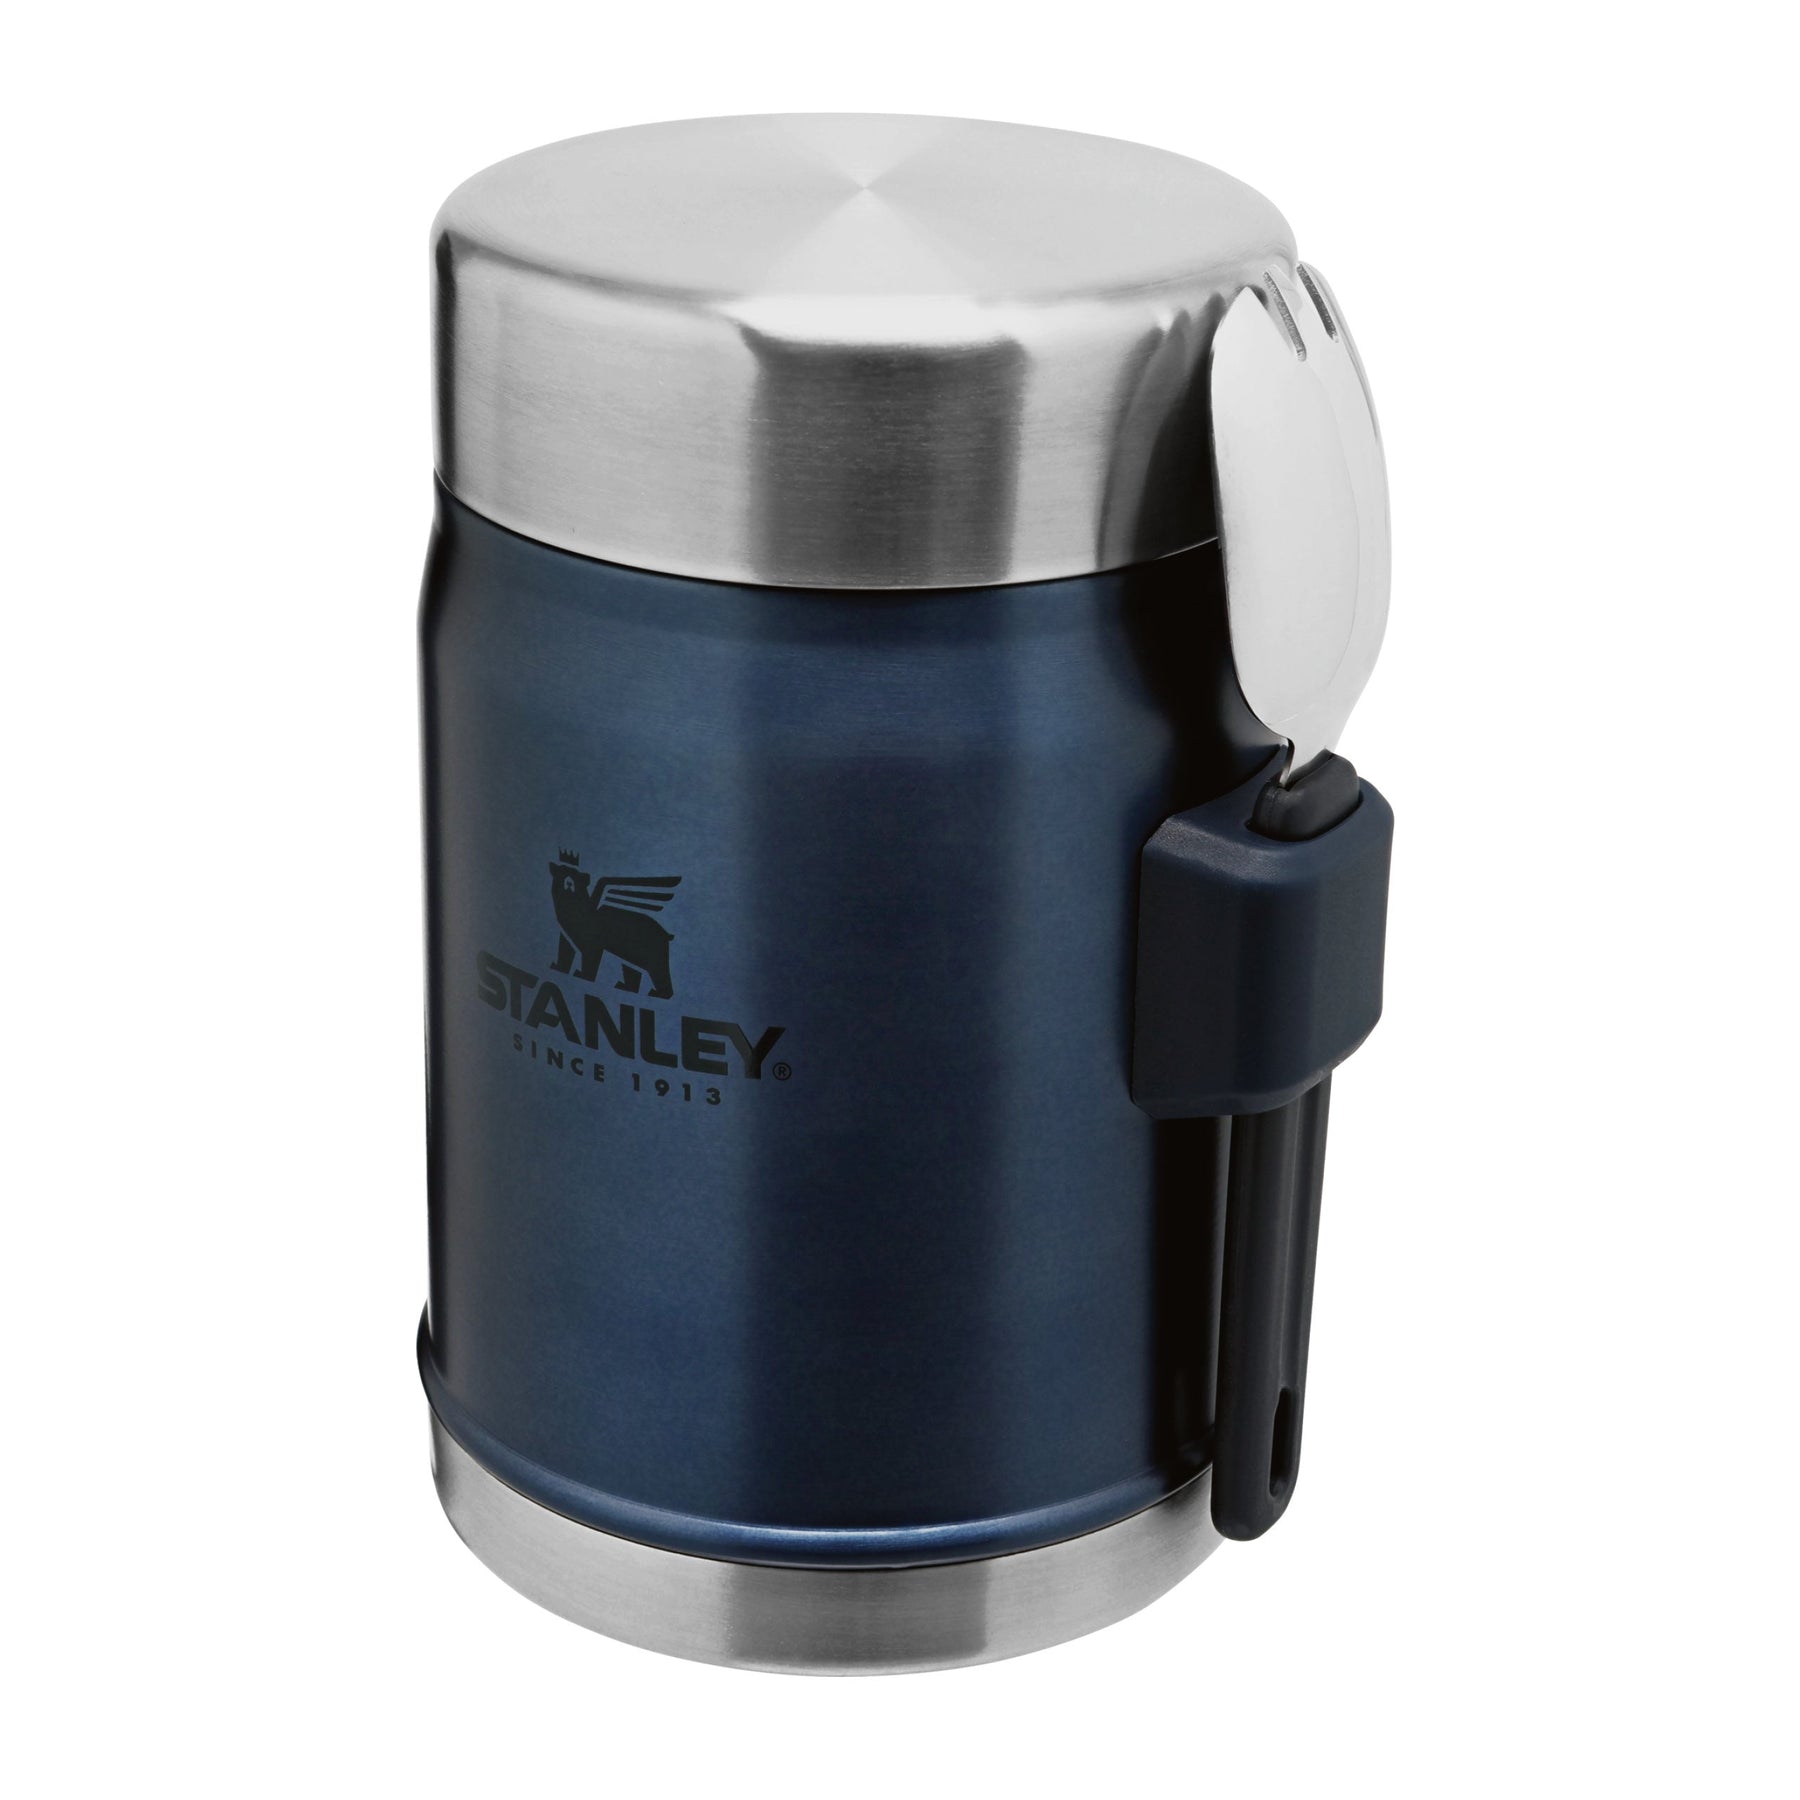 STANLEY Thermos Metal Stainless Steel Cup. 14 Ounces. Screw Top